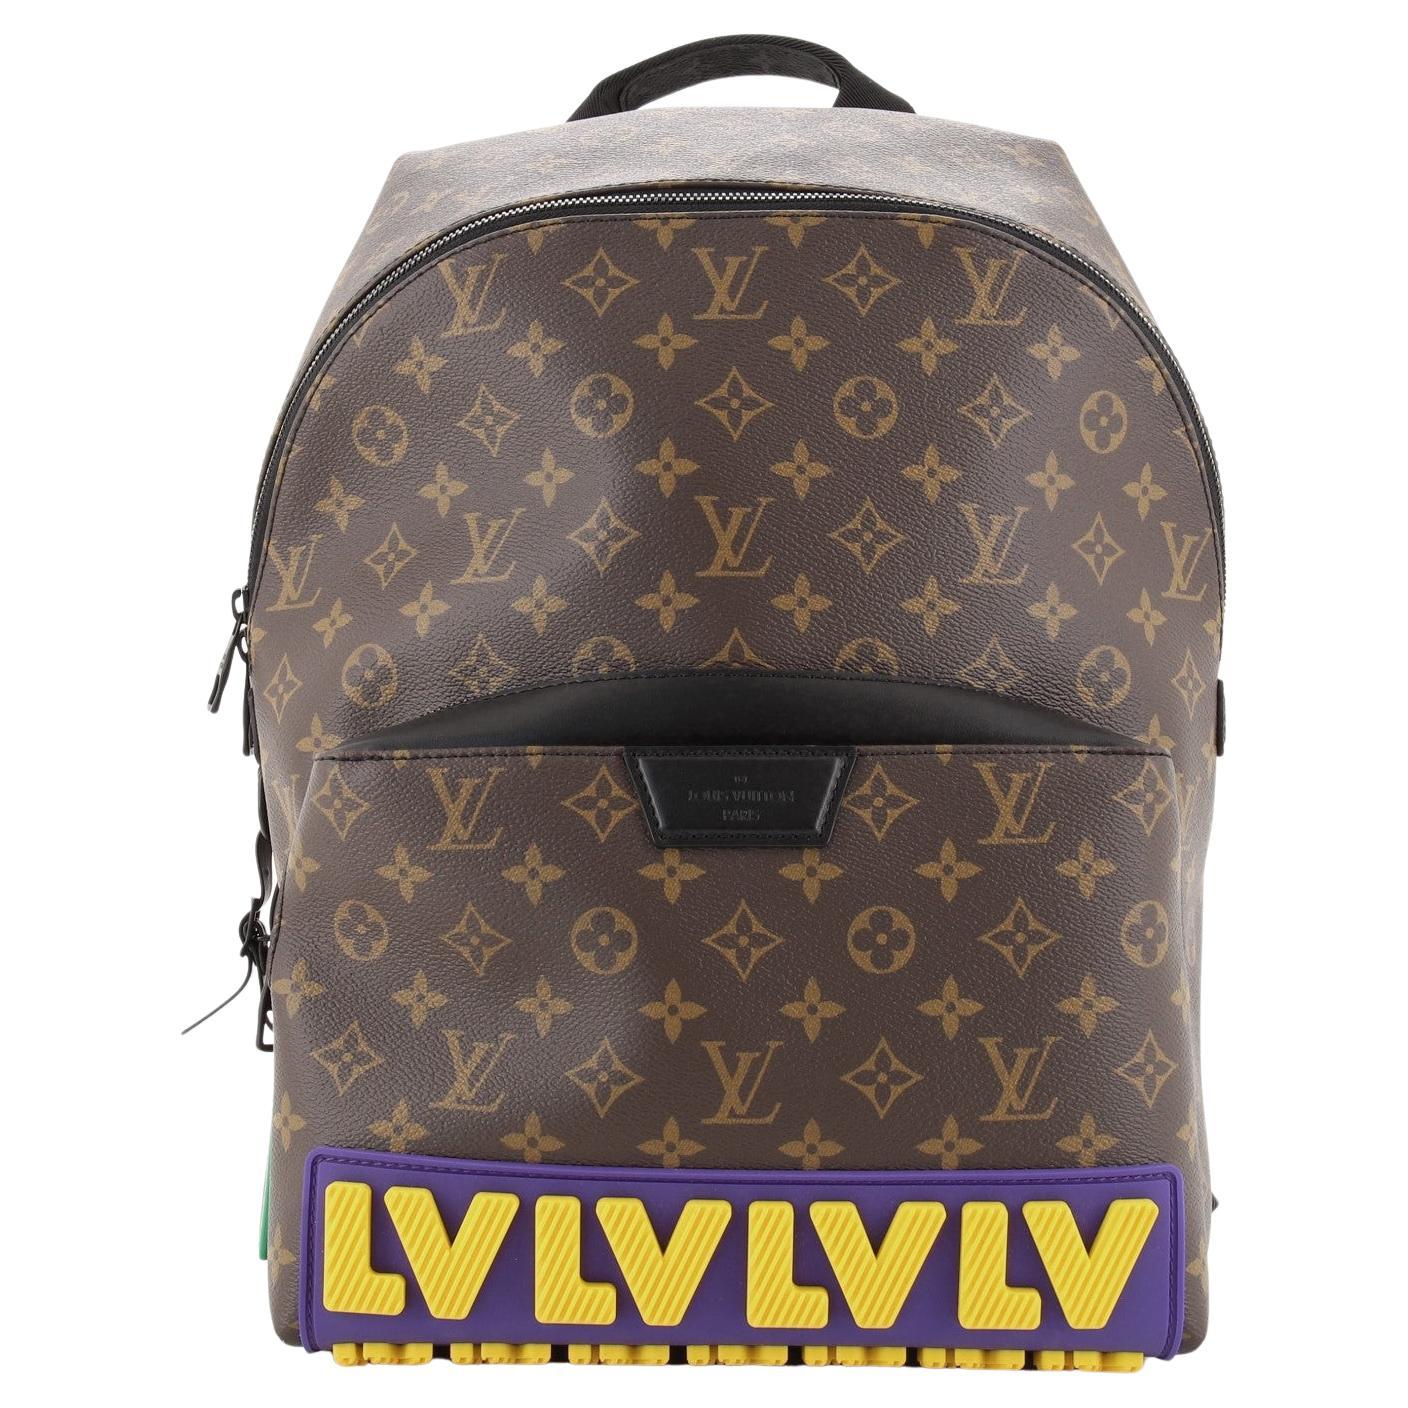 Louis Vuitton Discovery Backpack Limited Edition LV Rubber Monogram Canvas PM